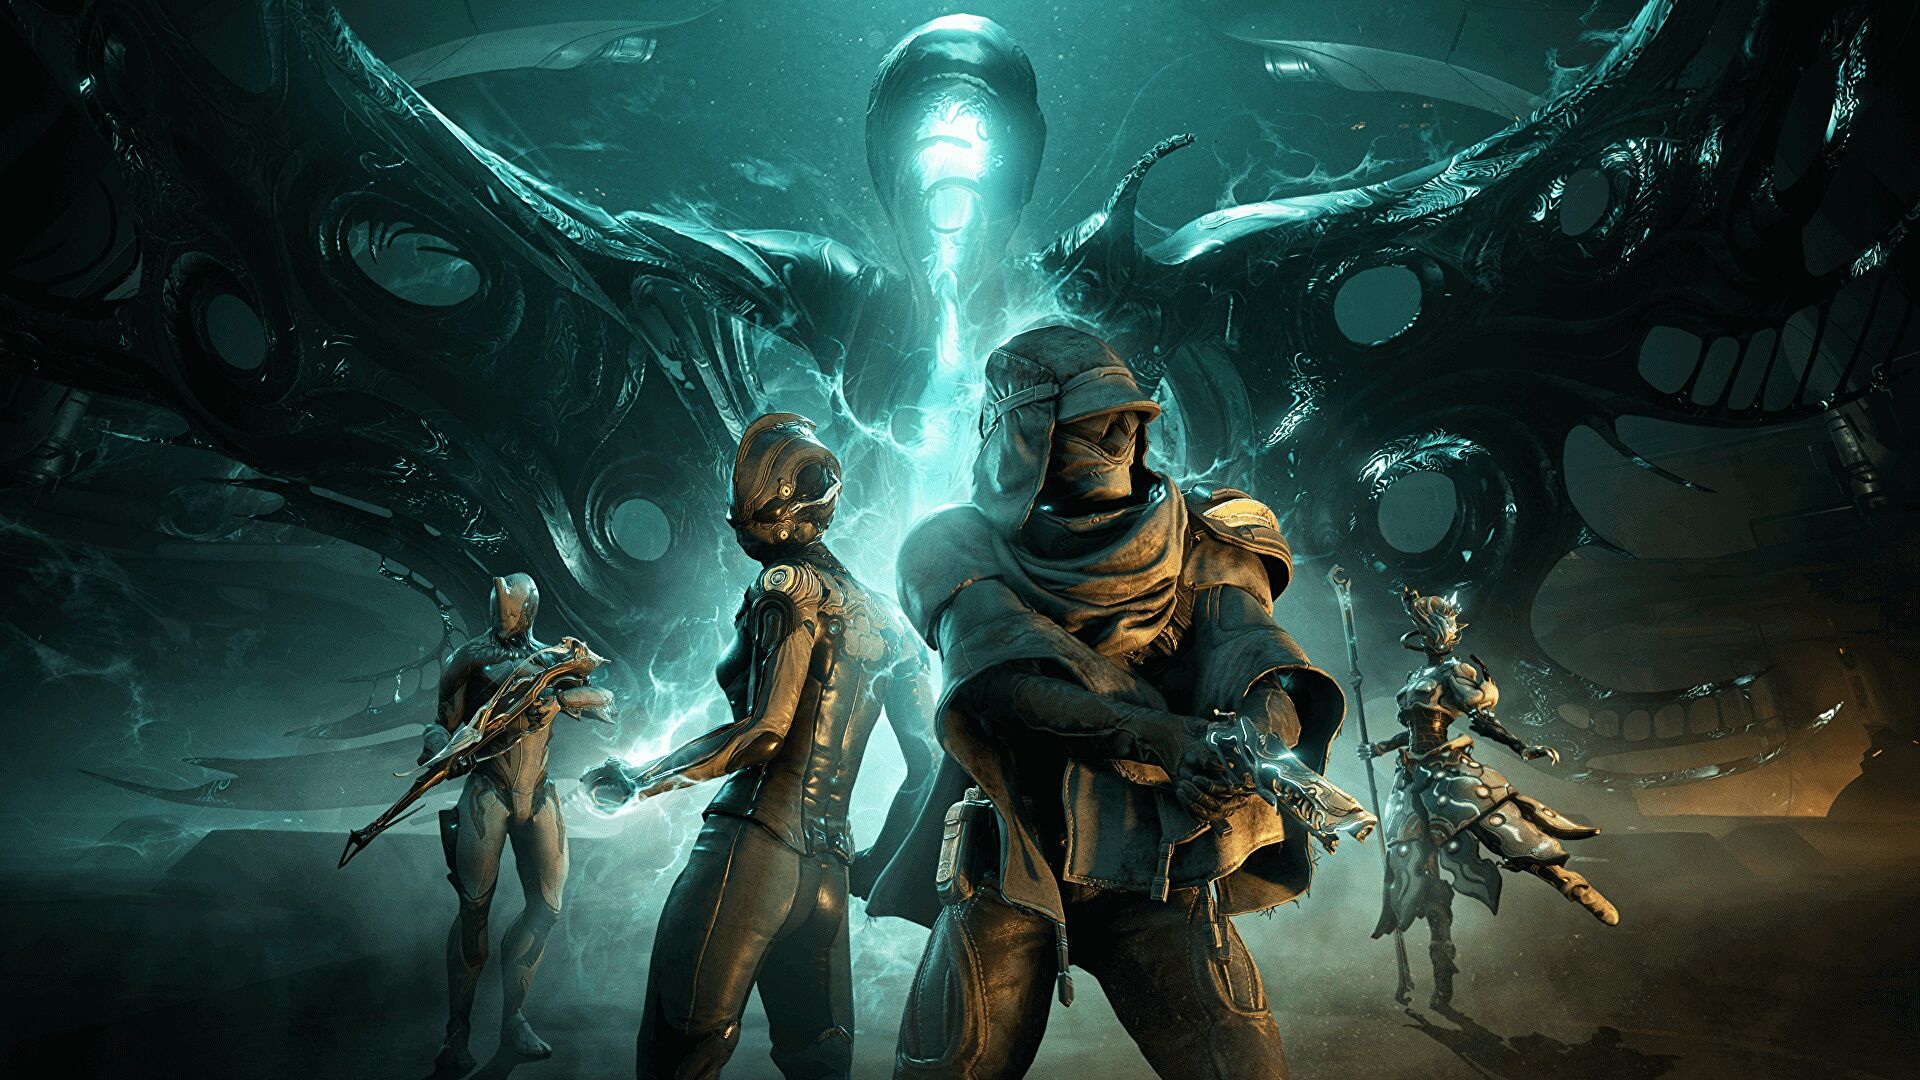 Warframe - Key art for Angels of the Zariman, showing a selection of Warframes and support characters against an eerie teal background